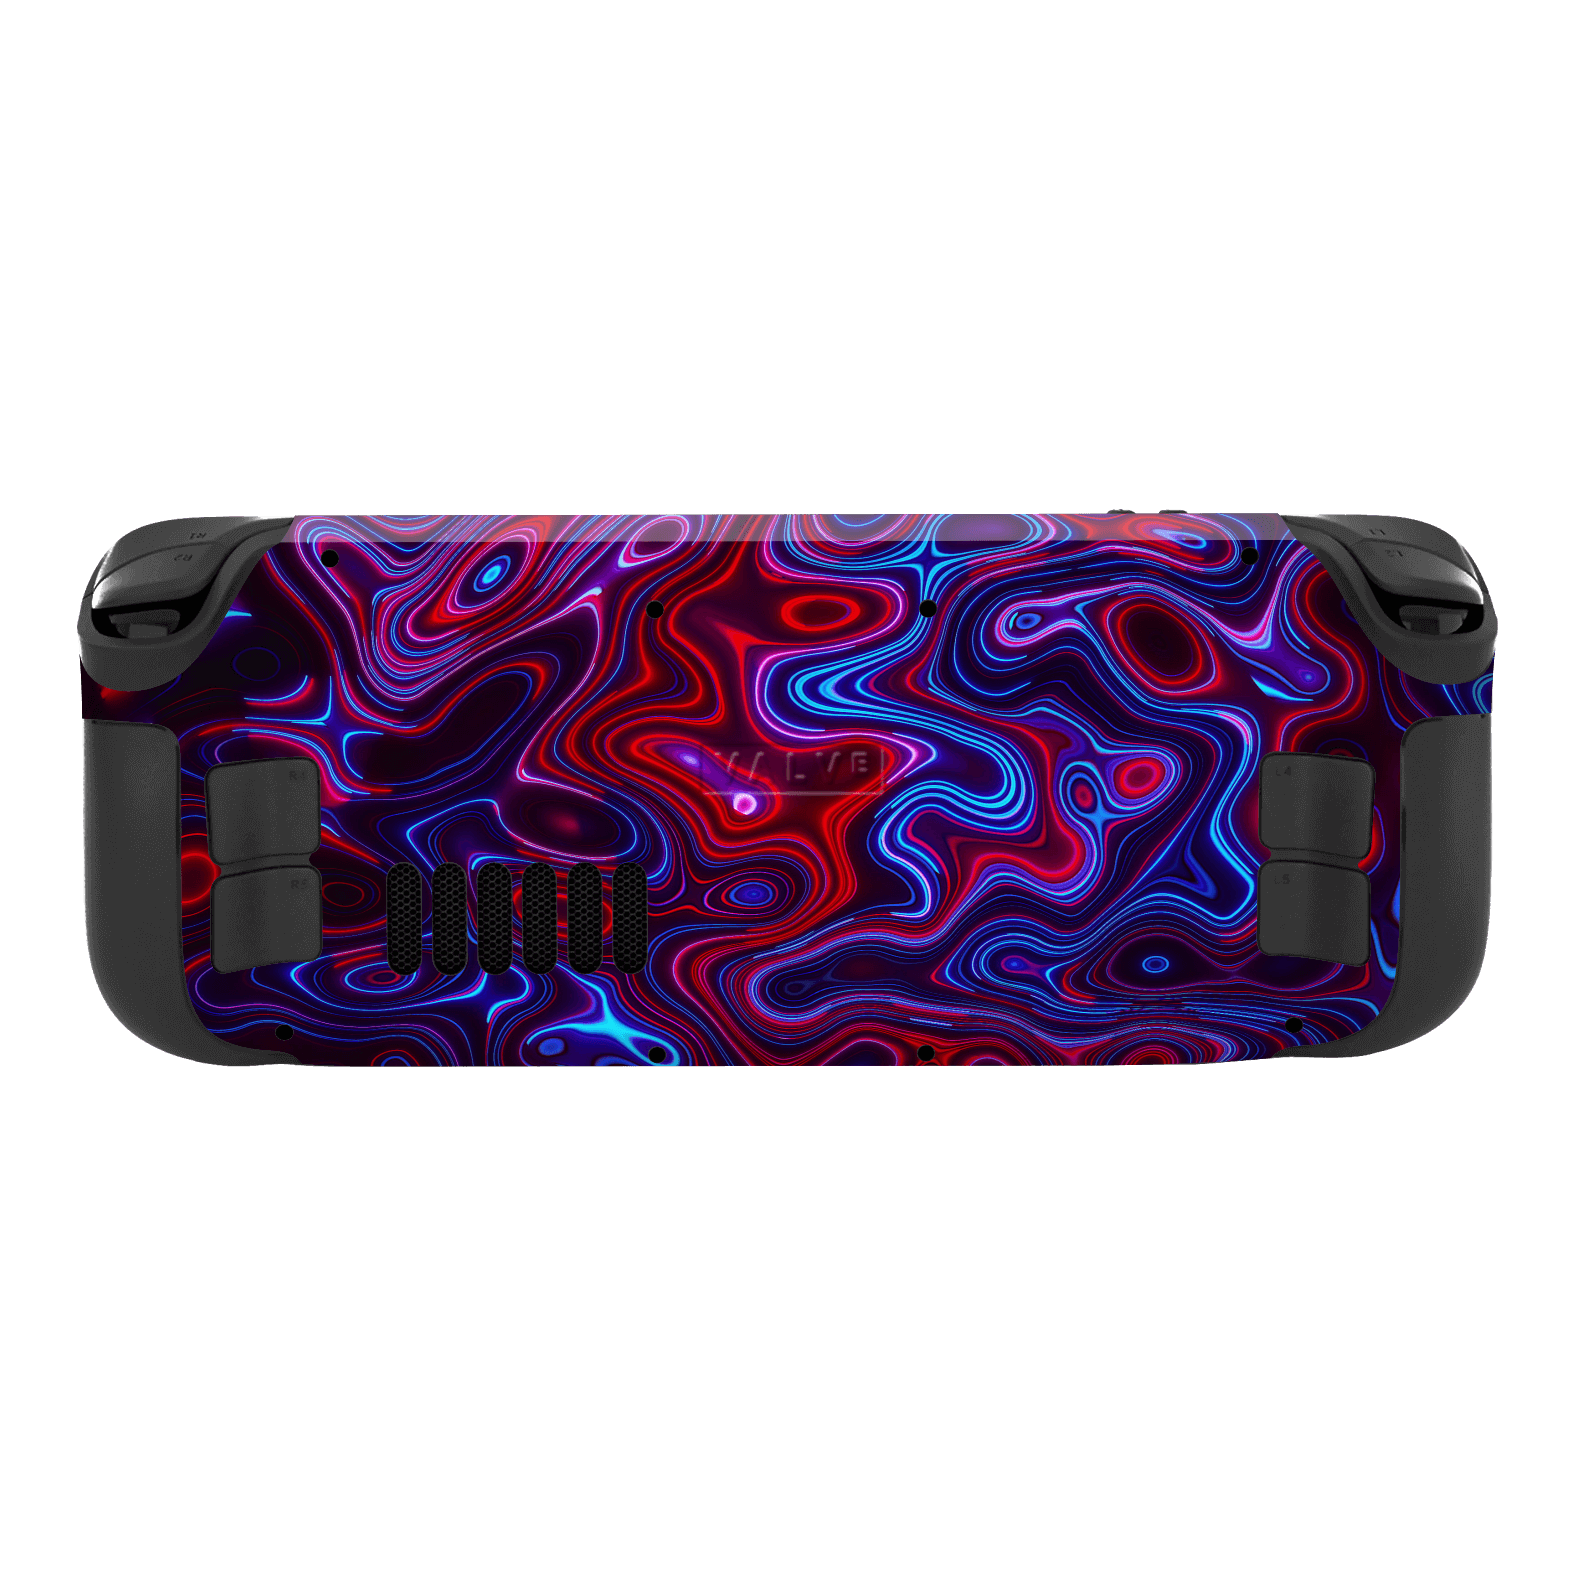 Steam Deck OLED Print Printed Custom SIGNATURE Flux Fusion Purple Neon Skin Wrap Sticker Decal Cover Protector by QSKINZ | QSKINZ.COM